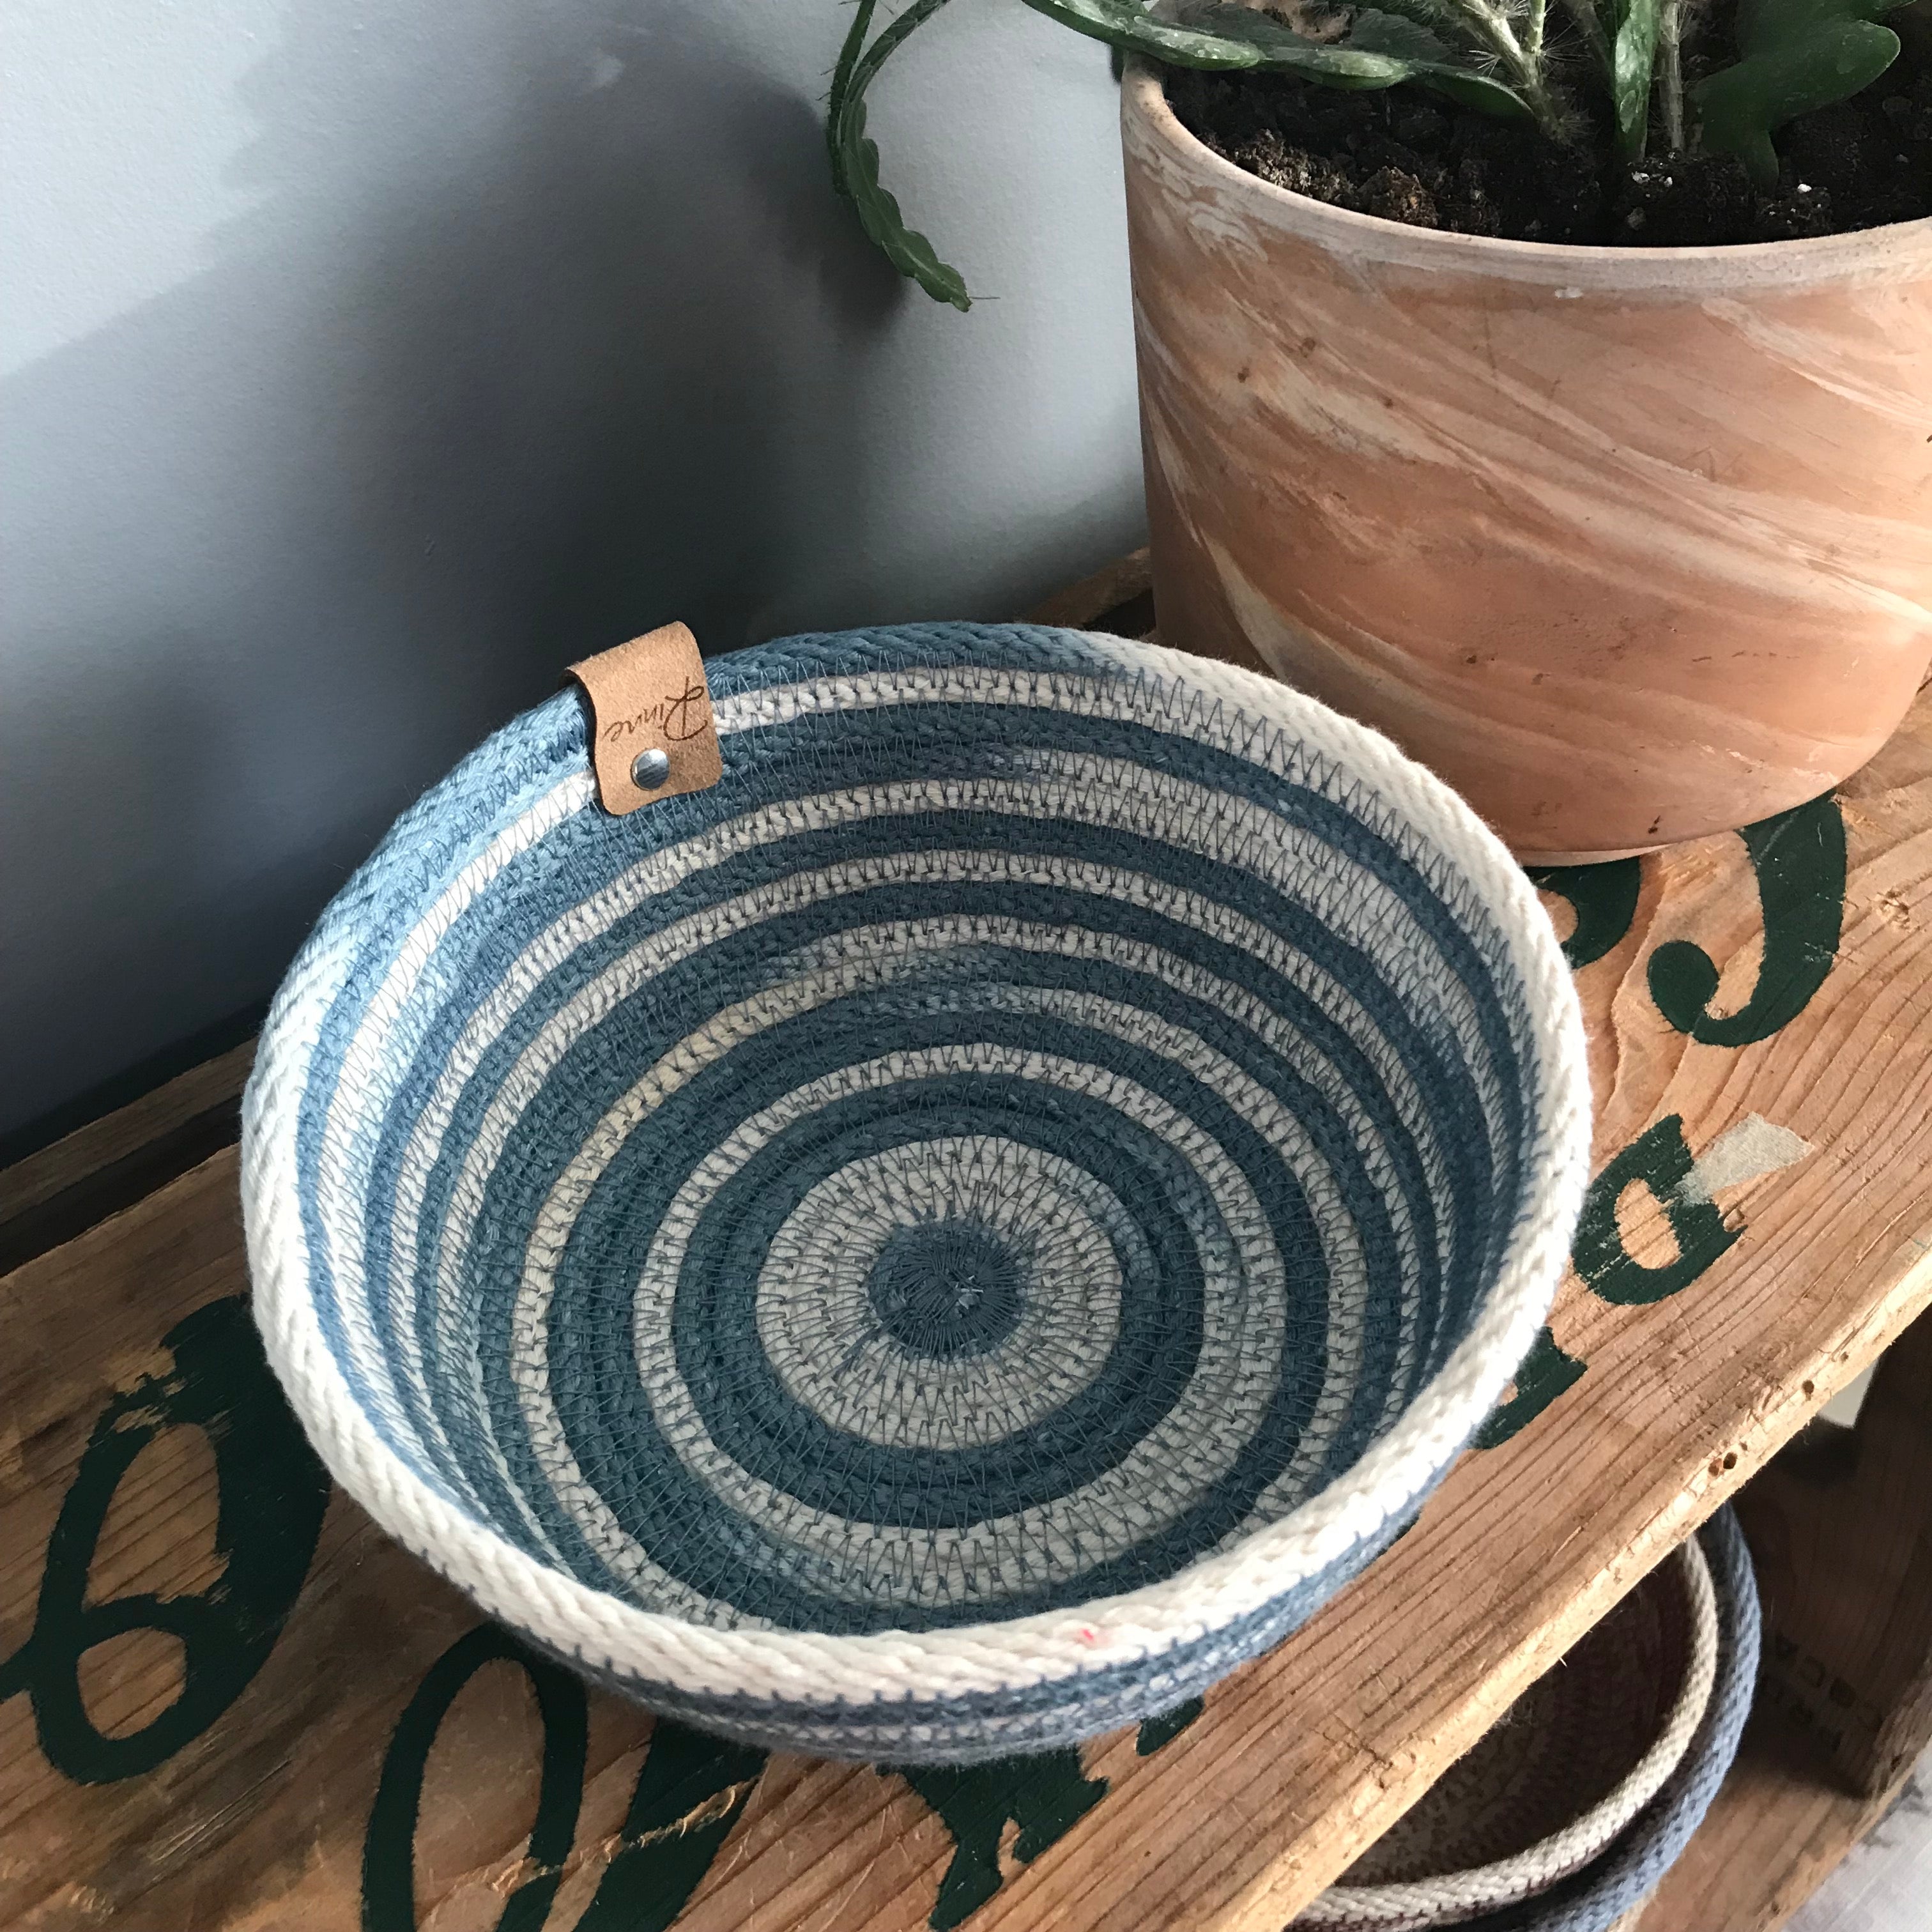 small rope bowl natural blue stitching